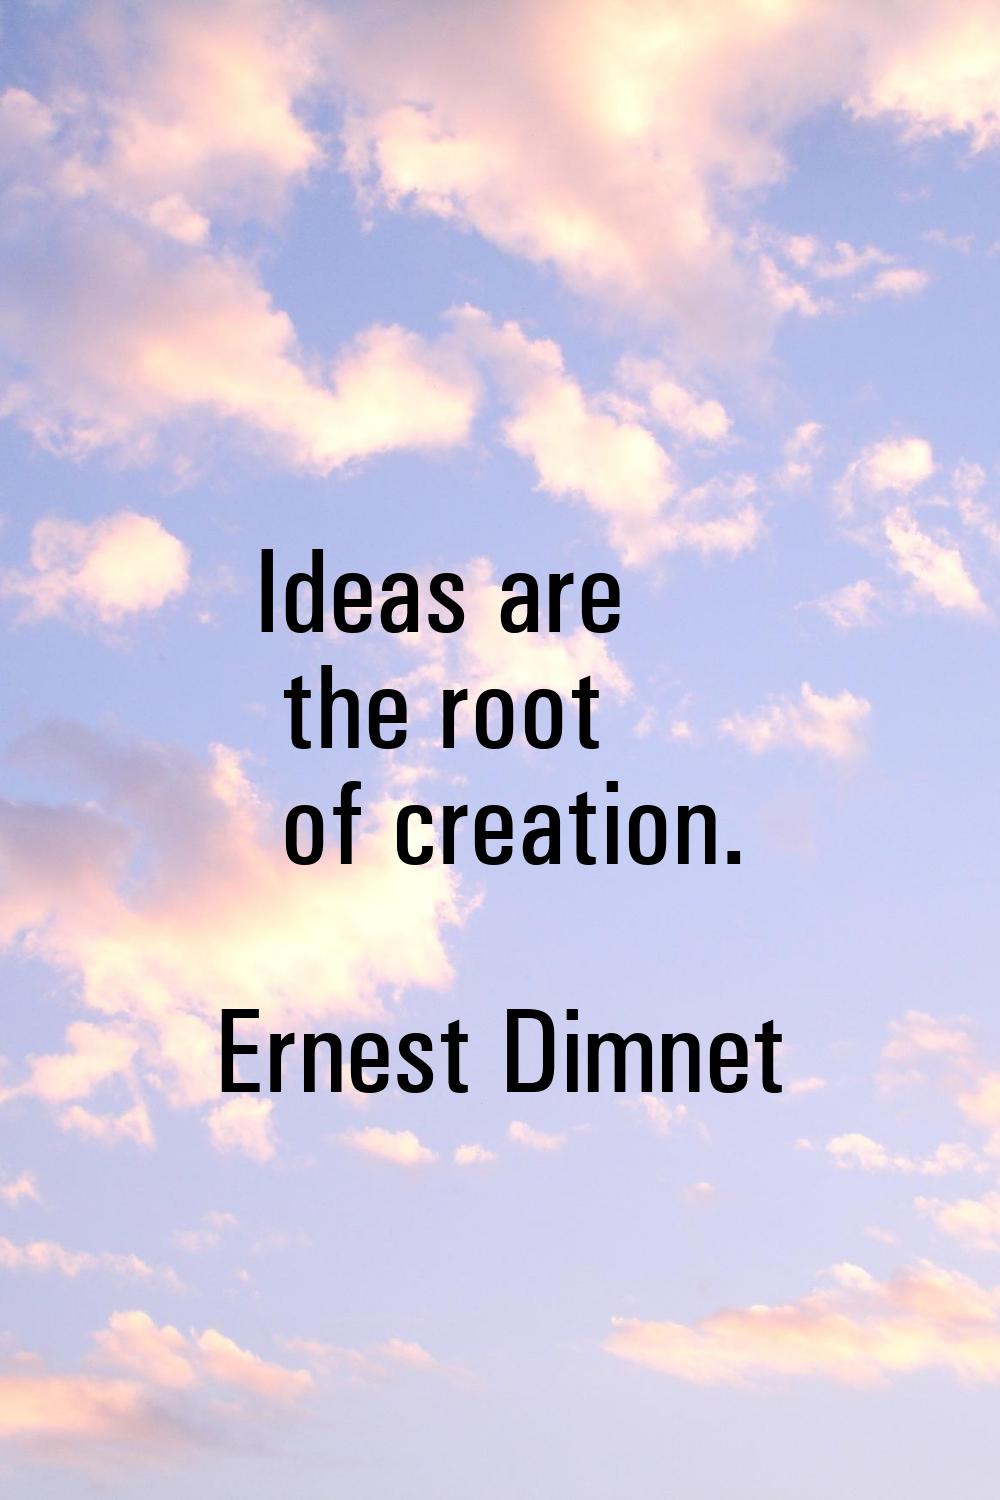 Ideas are the root of creation.